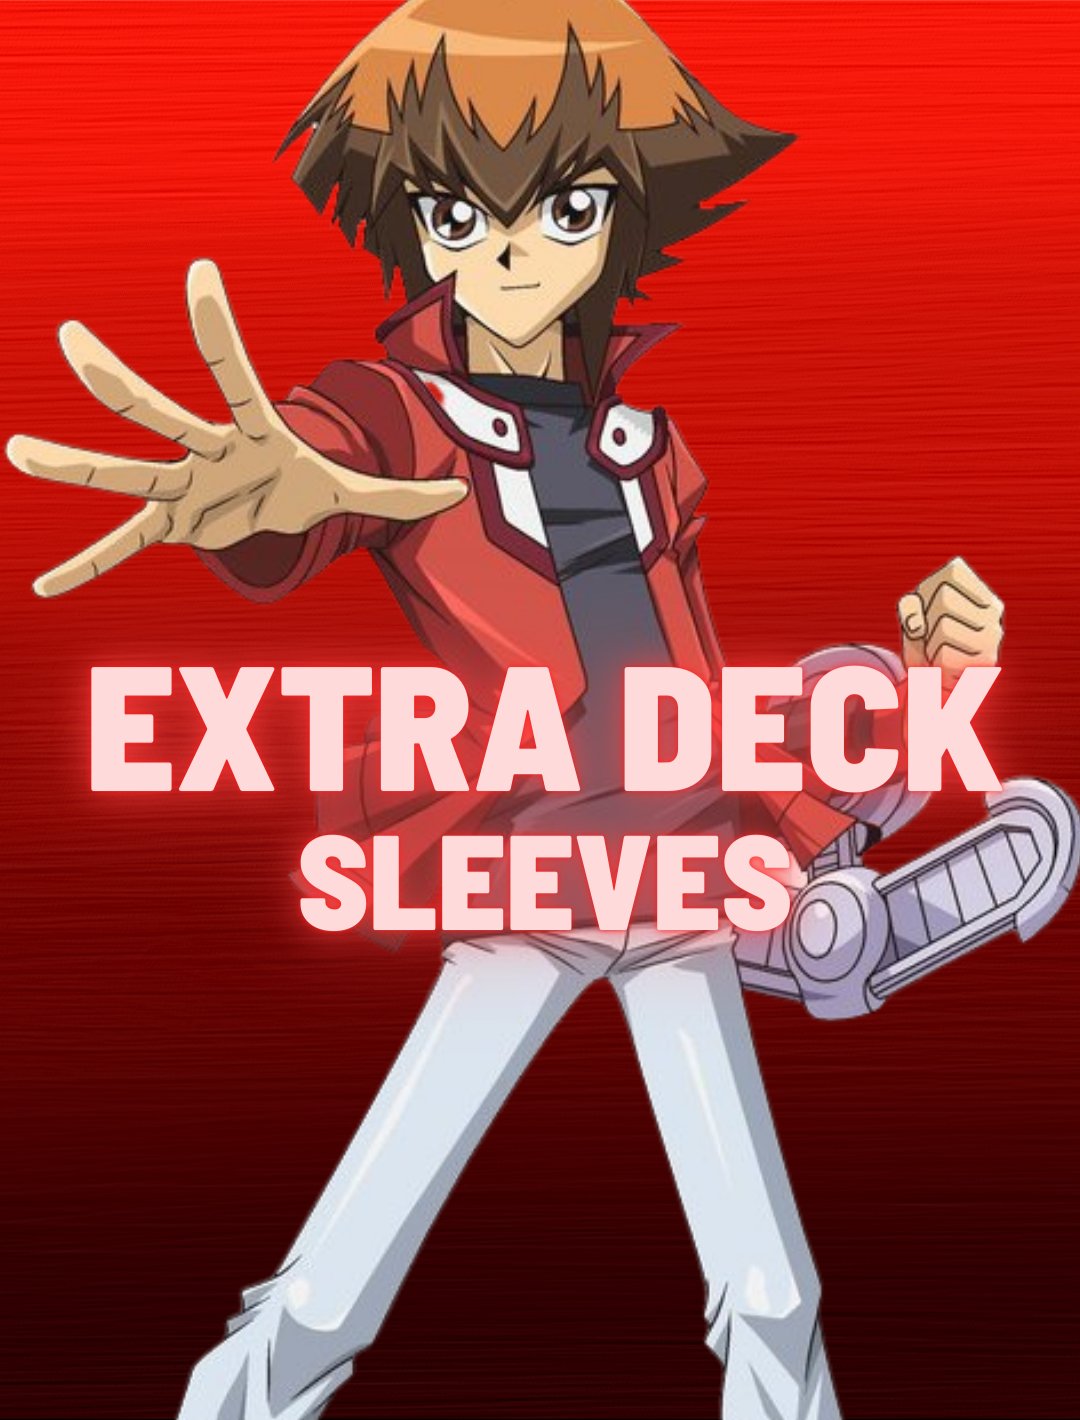 Extra deck sleeves